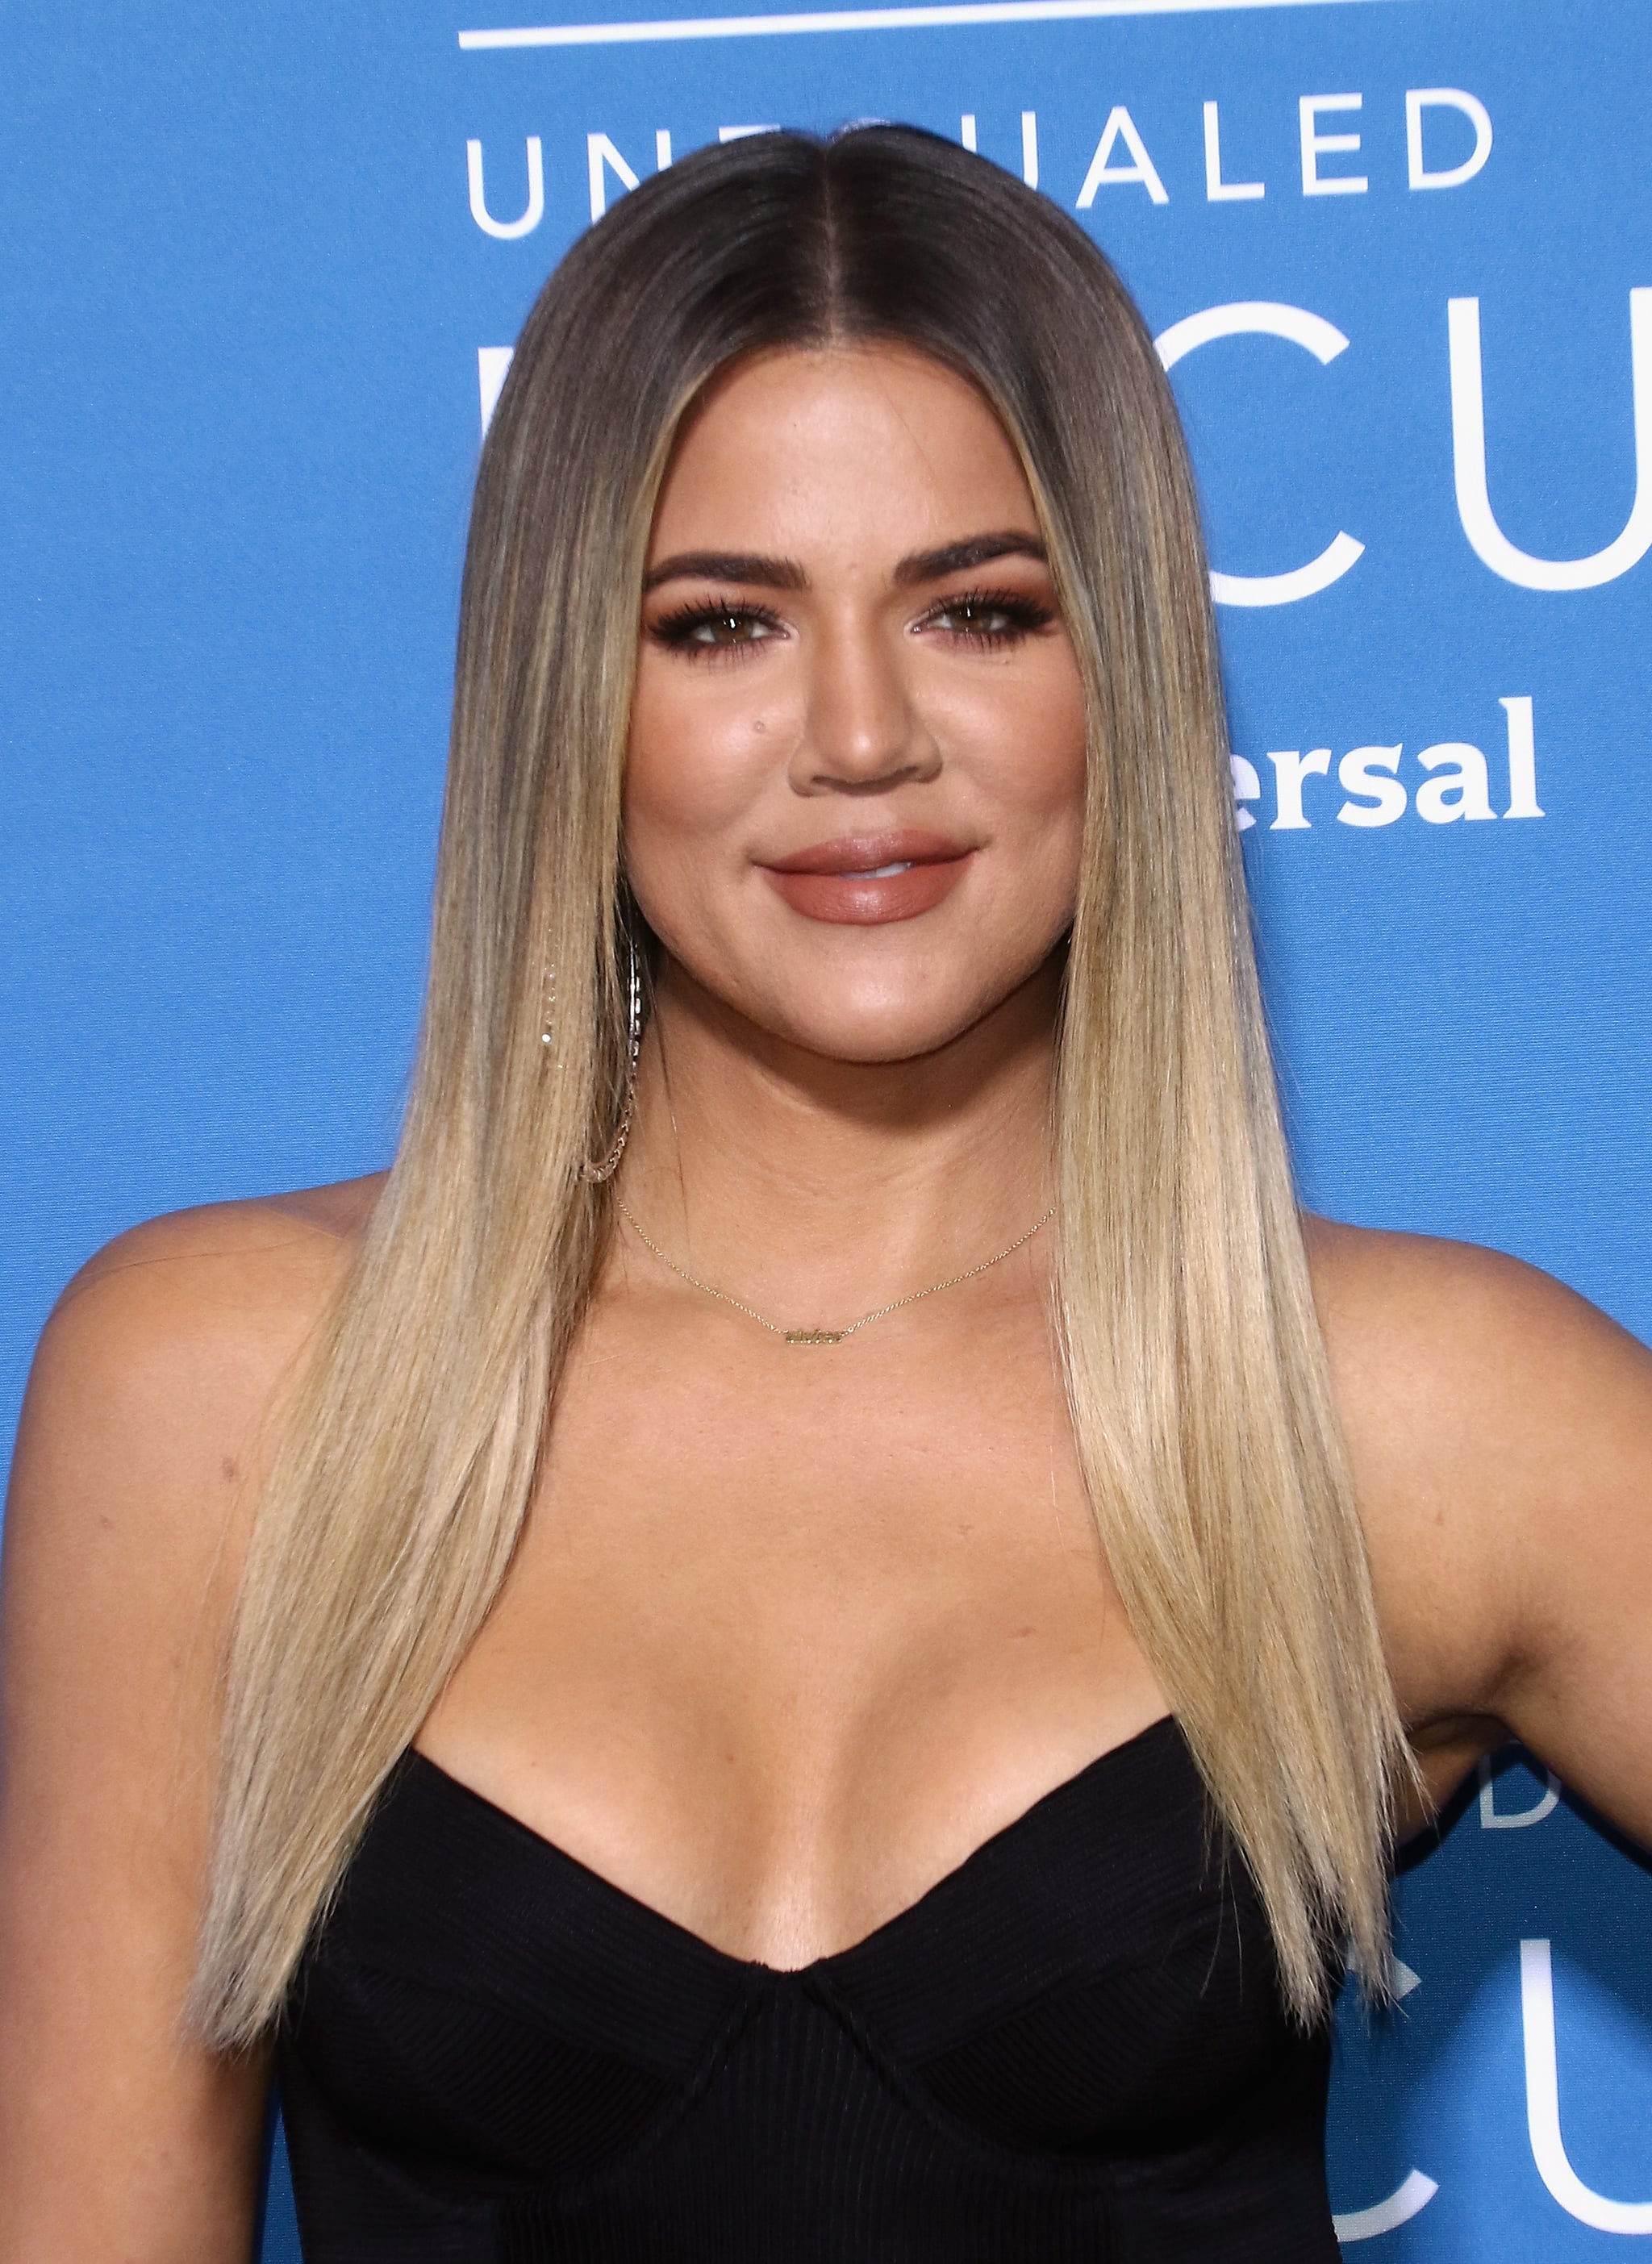 NEW YORK, NY - MAY 15:  TV personality Khloe Kardashian attends the 2017 NBCUniversal Upfront at Radio City Music Hall on May 15, 2017 in New York City.  (Photo by Jim Spellman/WireImage)